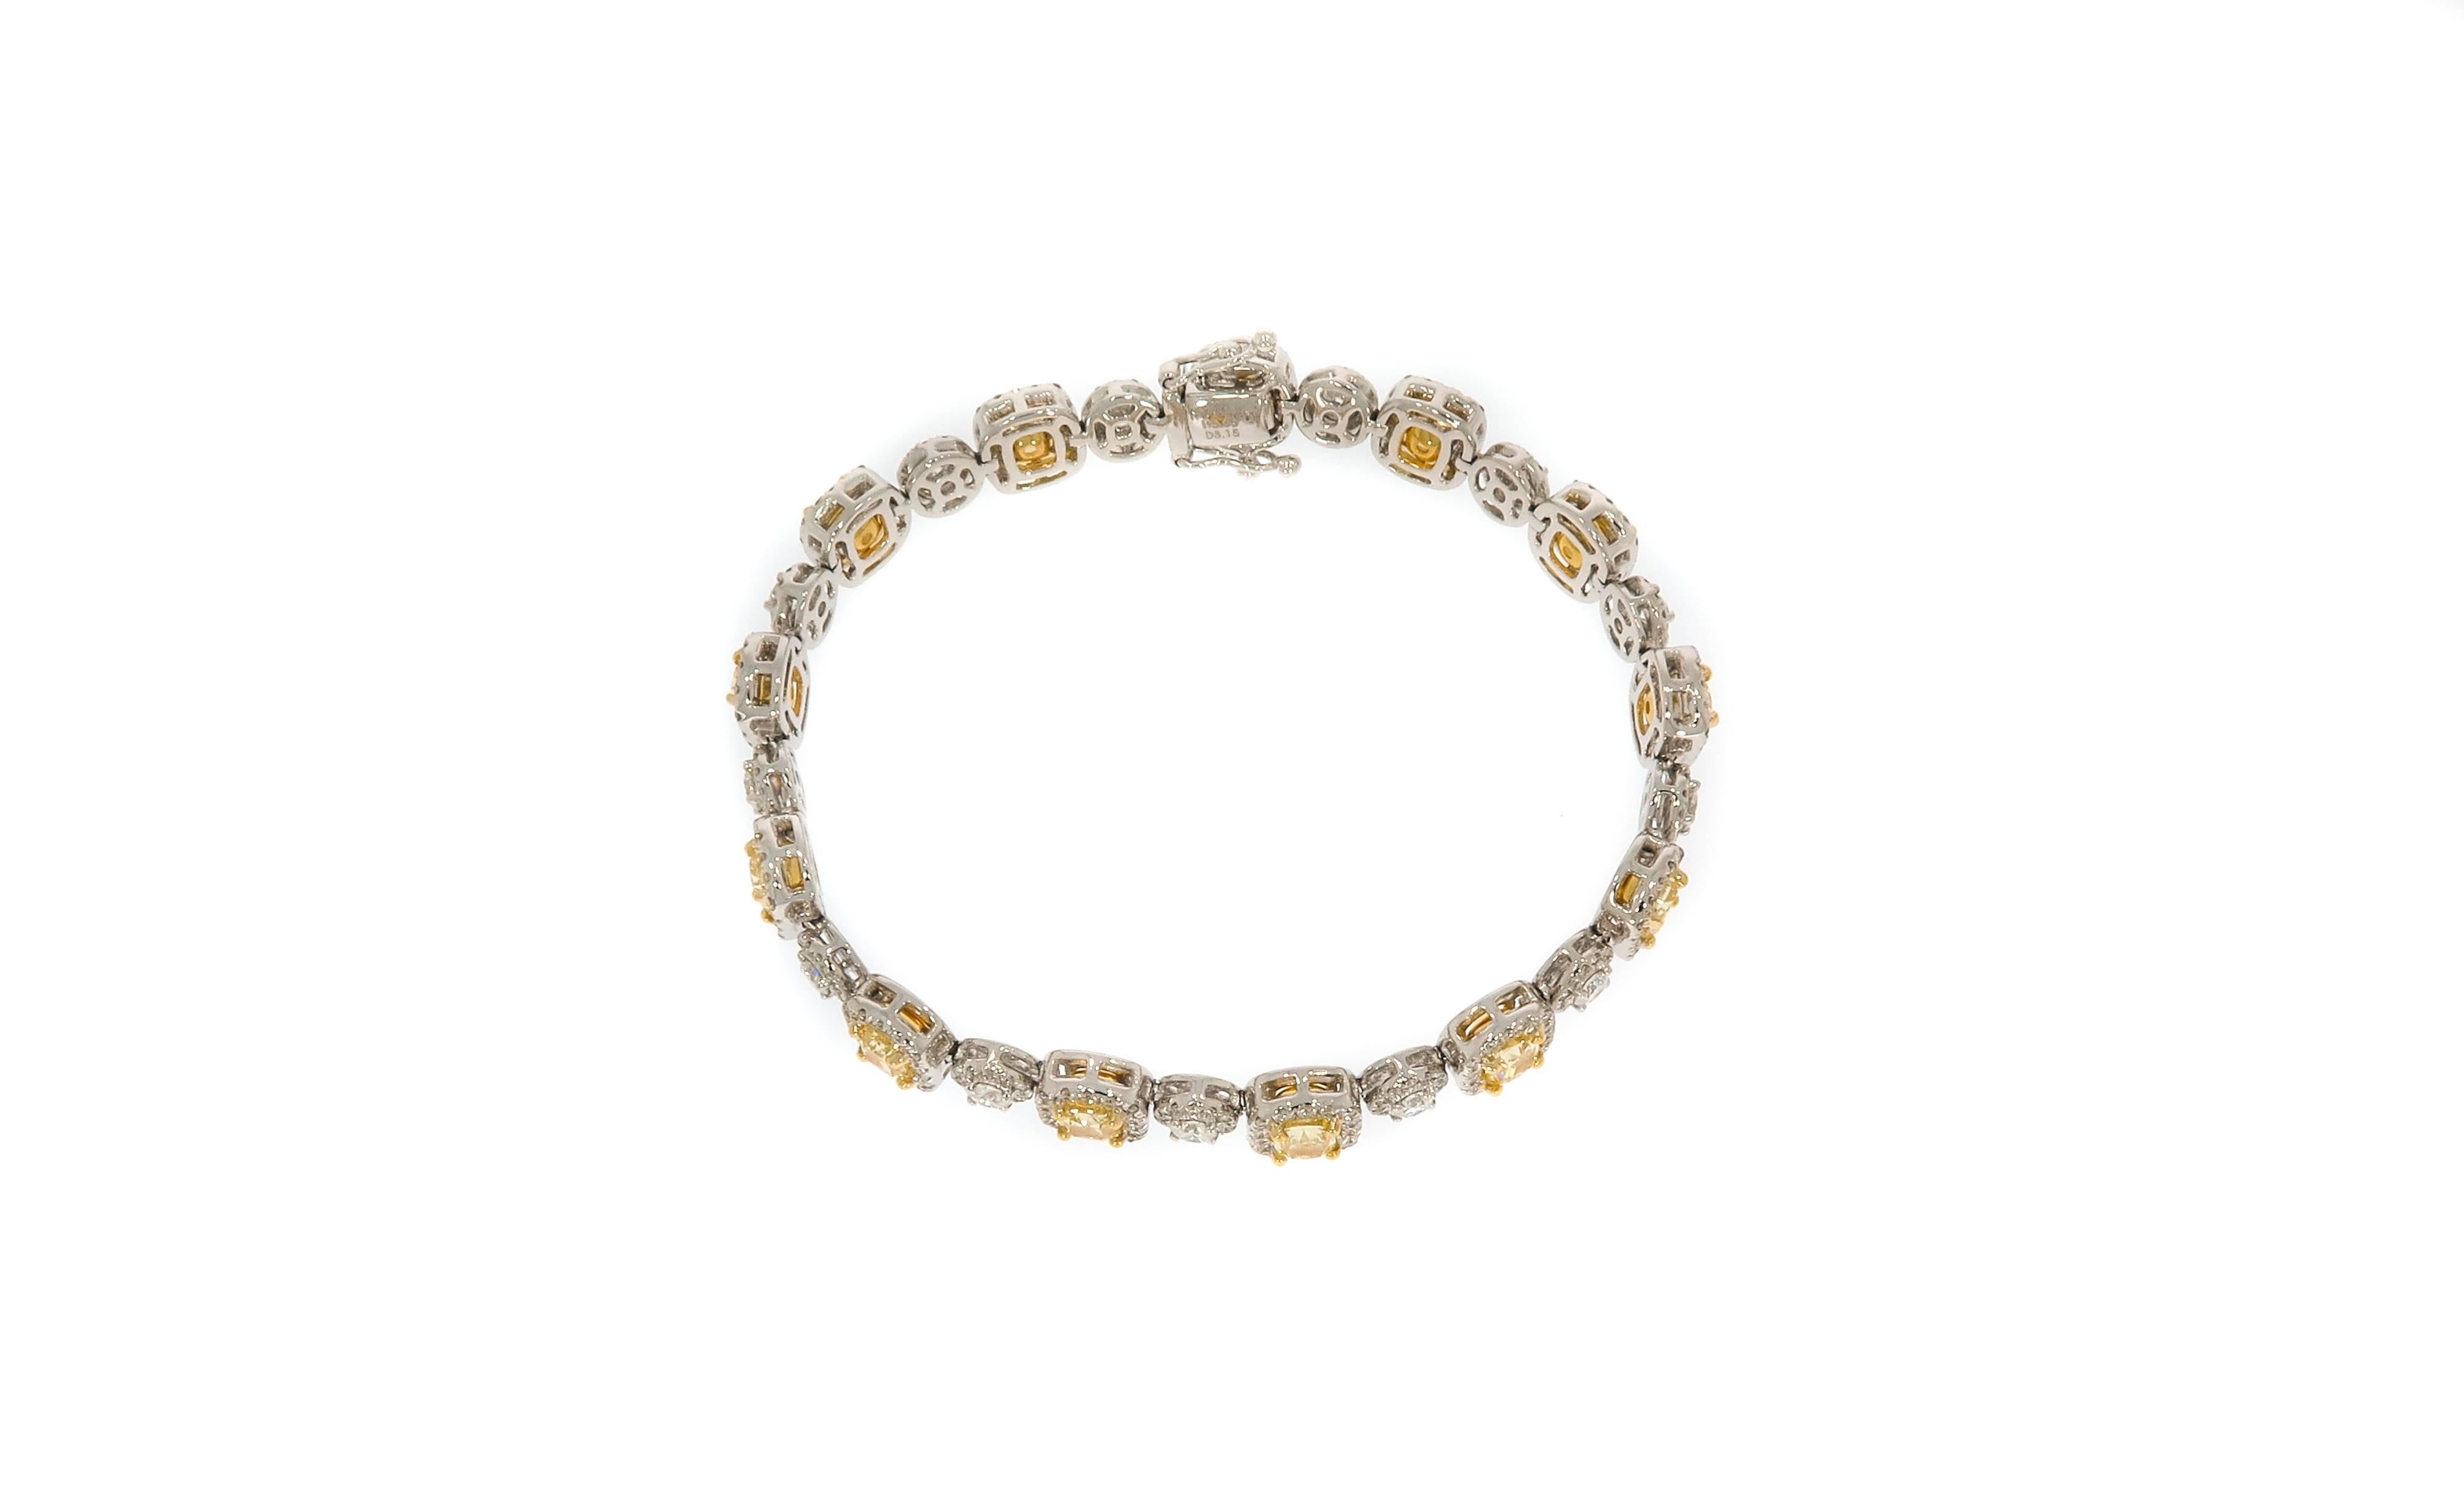 Elegance, grace, precision and technique are the characteristics of this precious bracelet, that shows an extraordinary expert technical craftsmanship: the aesthetic result, in its classic and elegant design, is obtained by harmoniously measuring